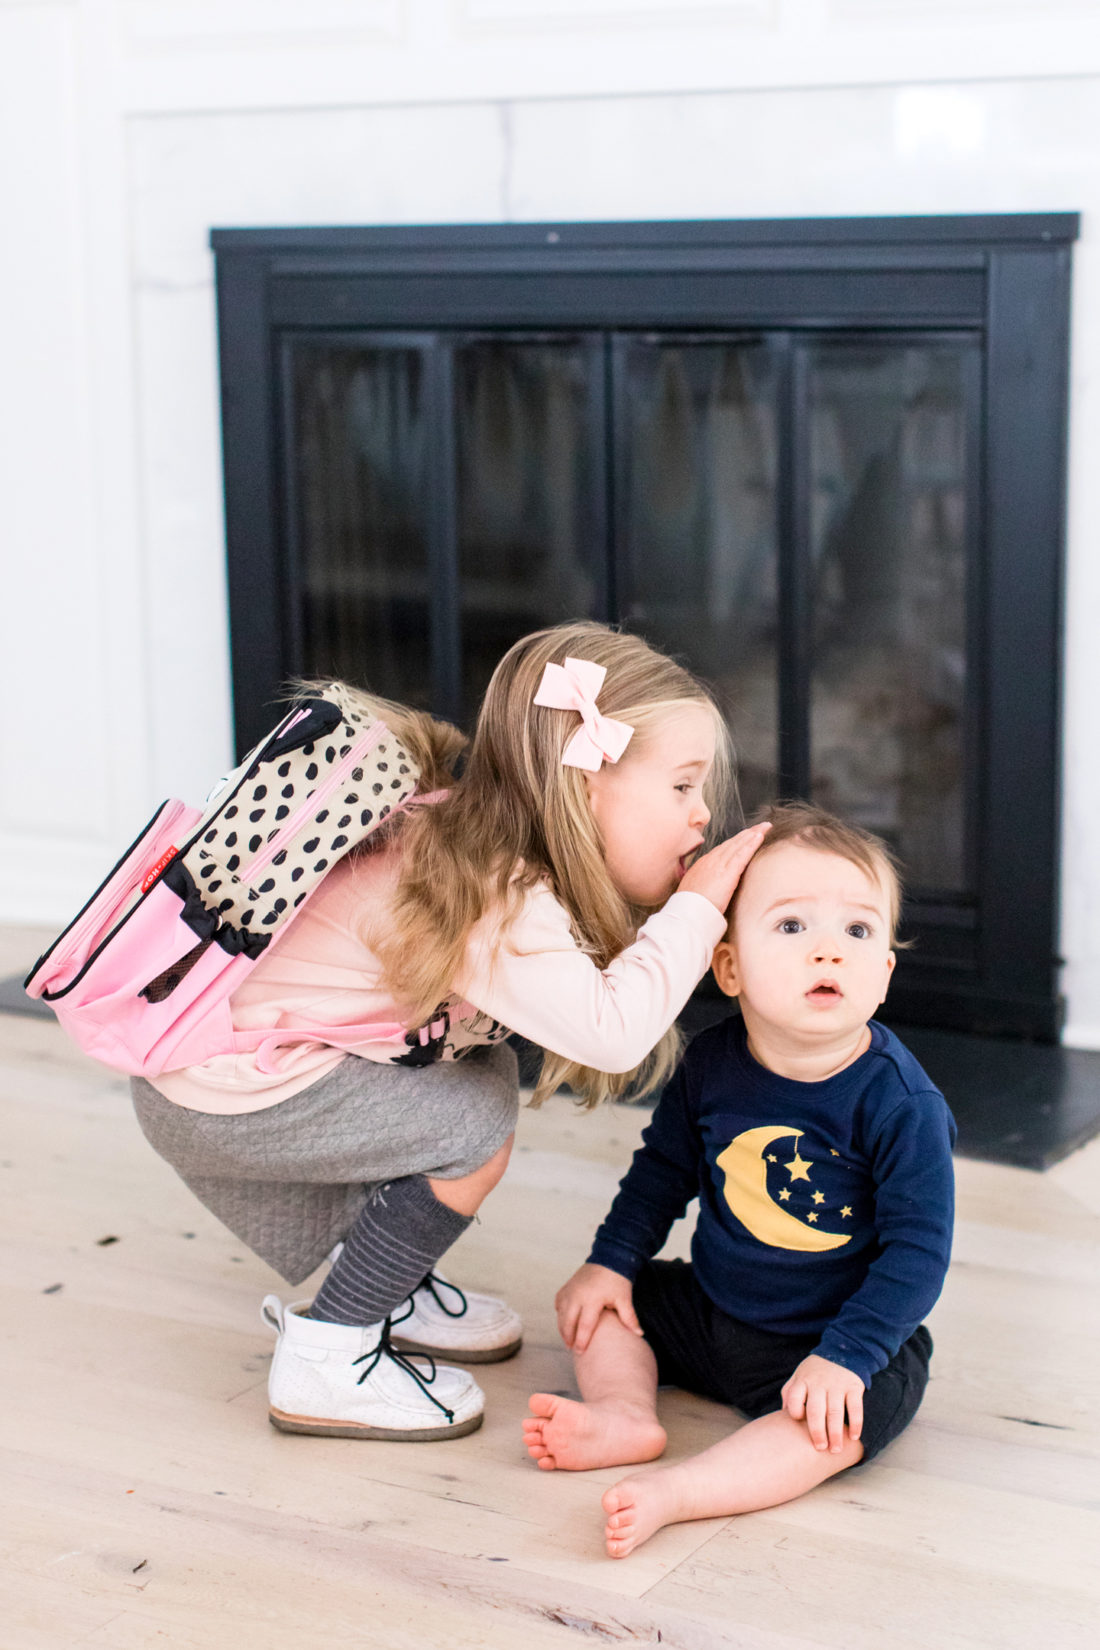 Marlowe Martino wears a pink sweatshirt, grey skirt, and kitty cat backpack as she leans down to pat little brother Major on the head before she heads off to school